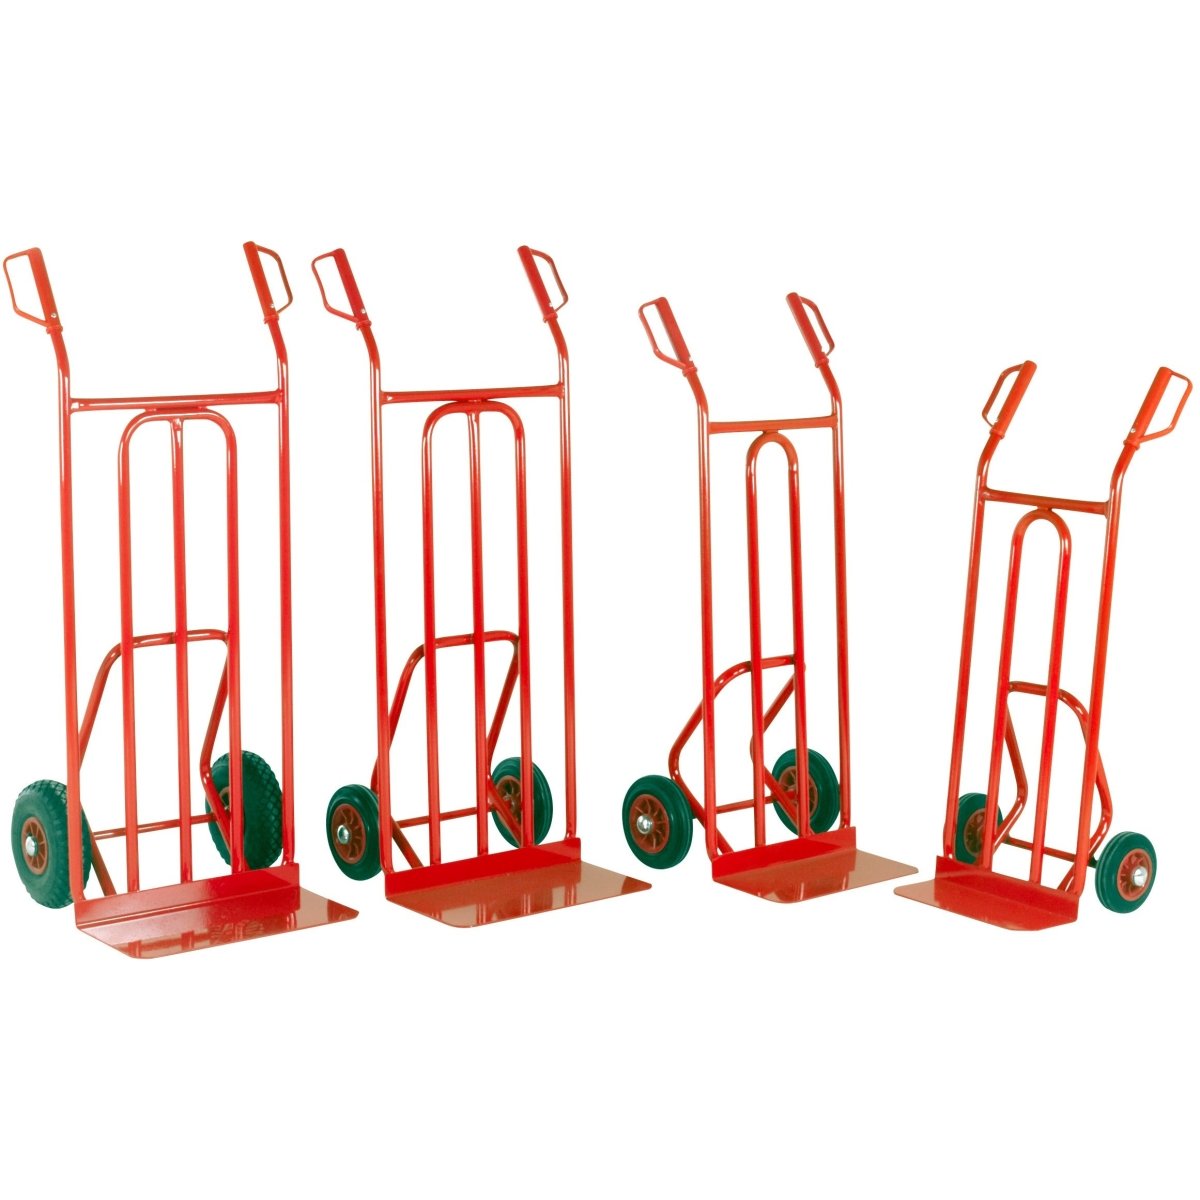 Loadtek Plated Sack Truck - Warehouse Storage Products